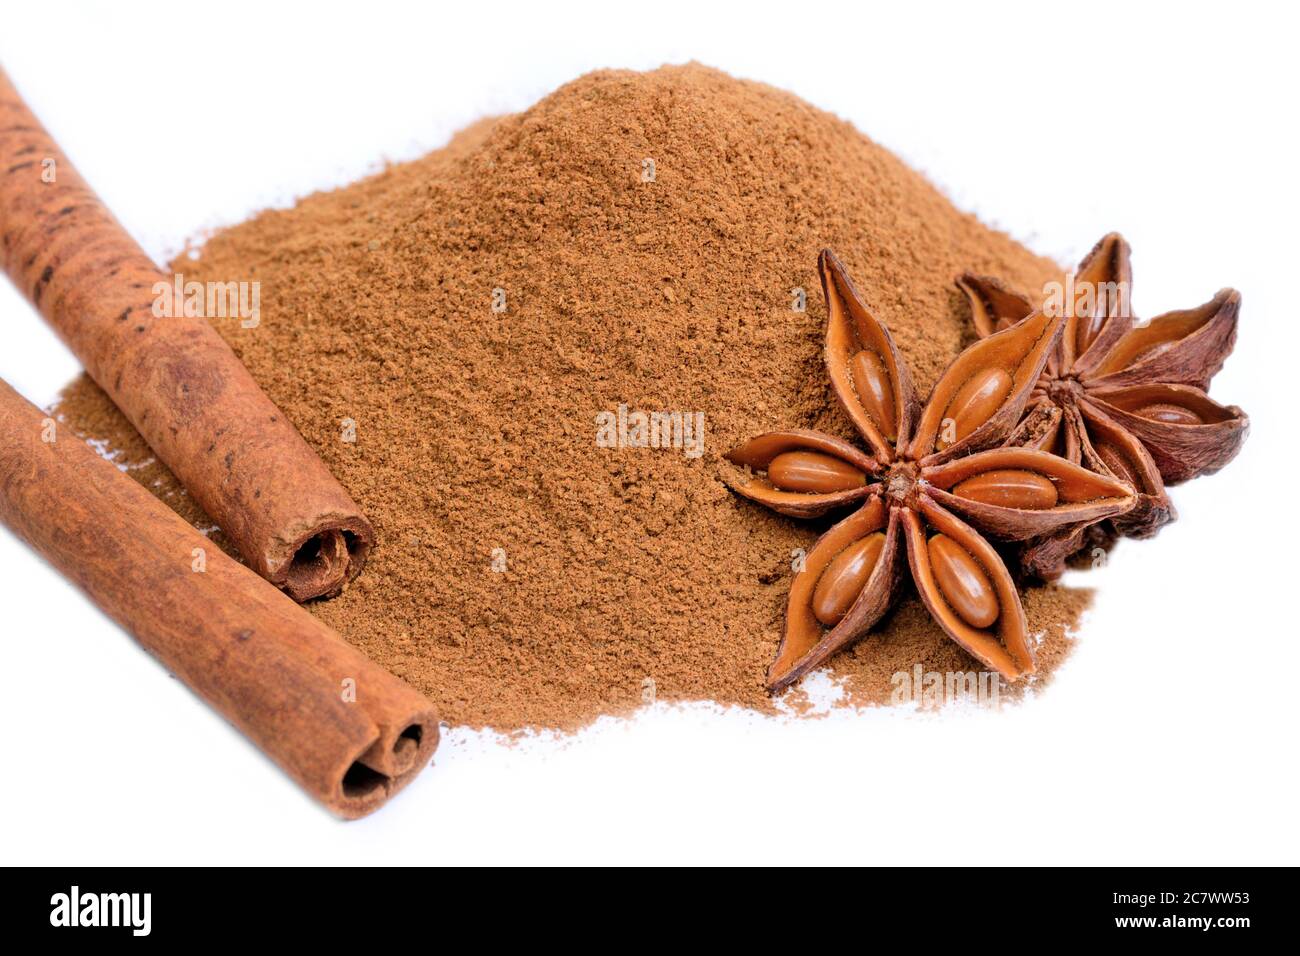 Close up of cinnamon powder and sticks with star anise on white background Stock Photo